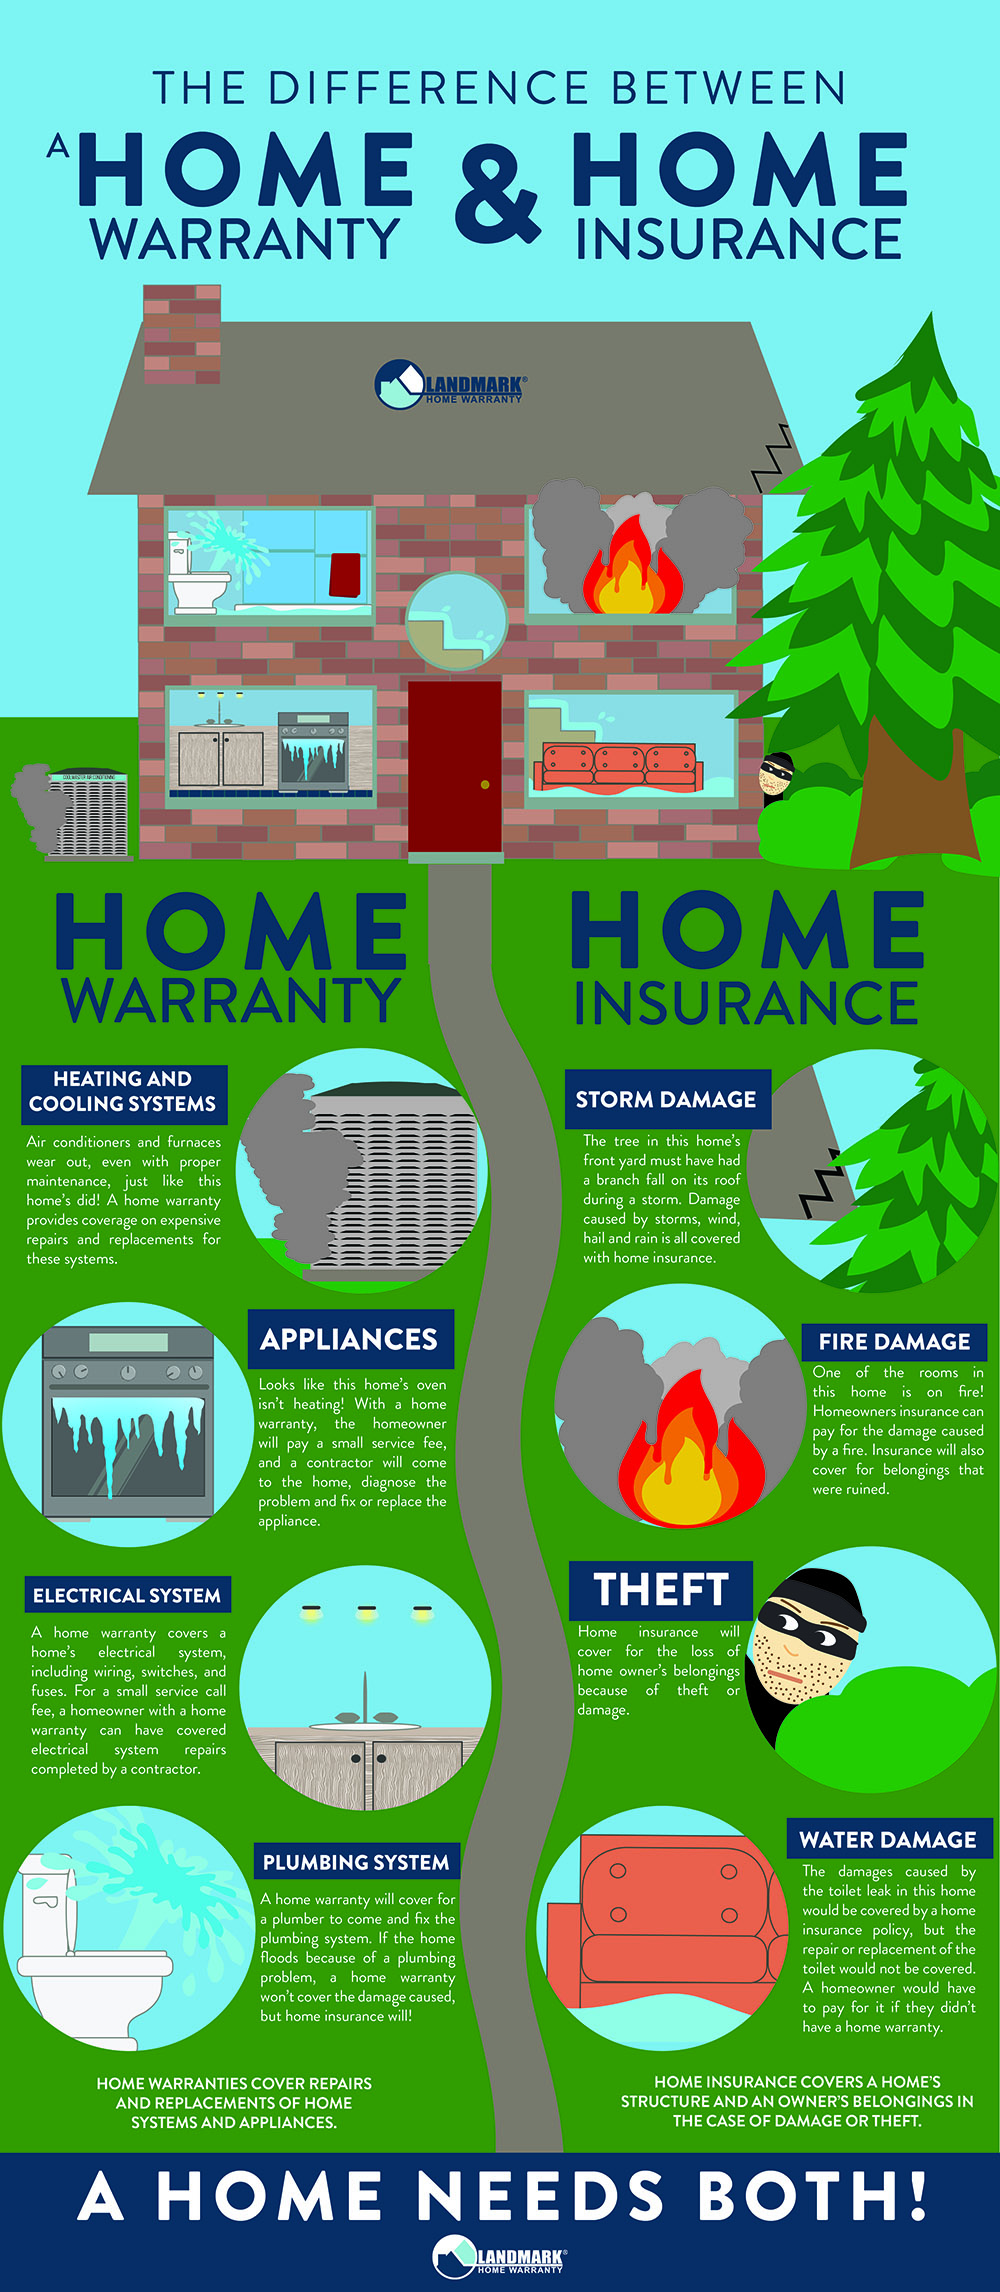 What's the Difference between Homeowners Insurance and Home Warranty